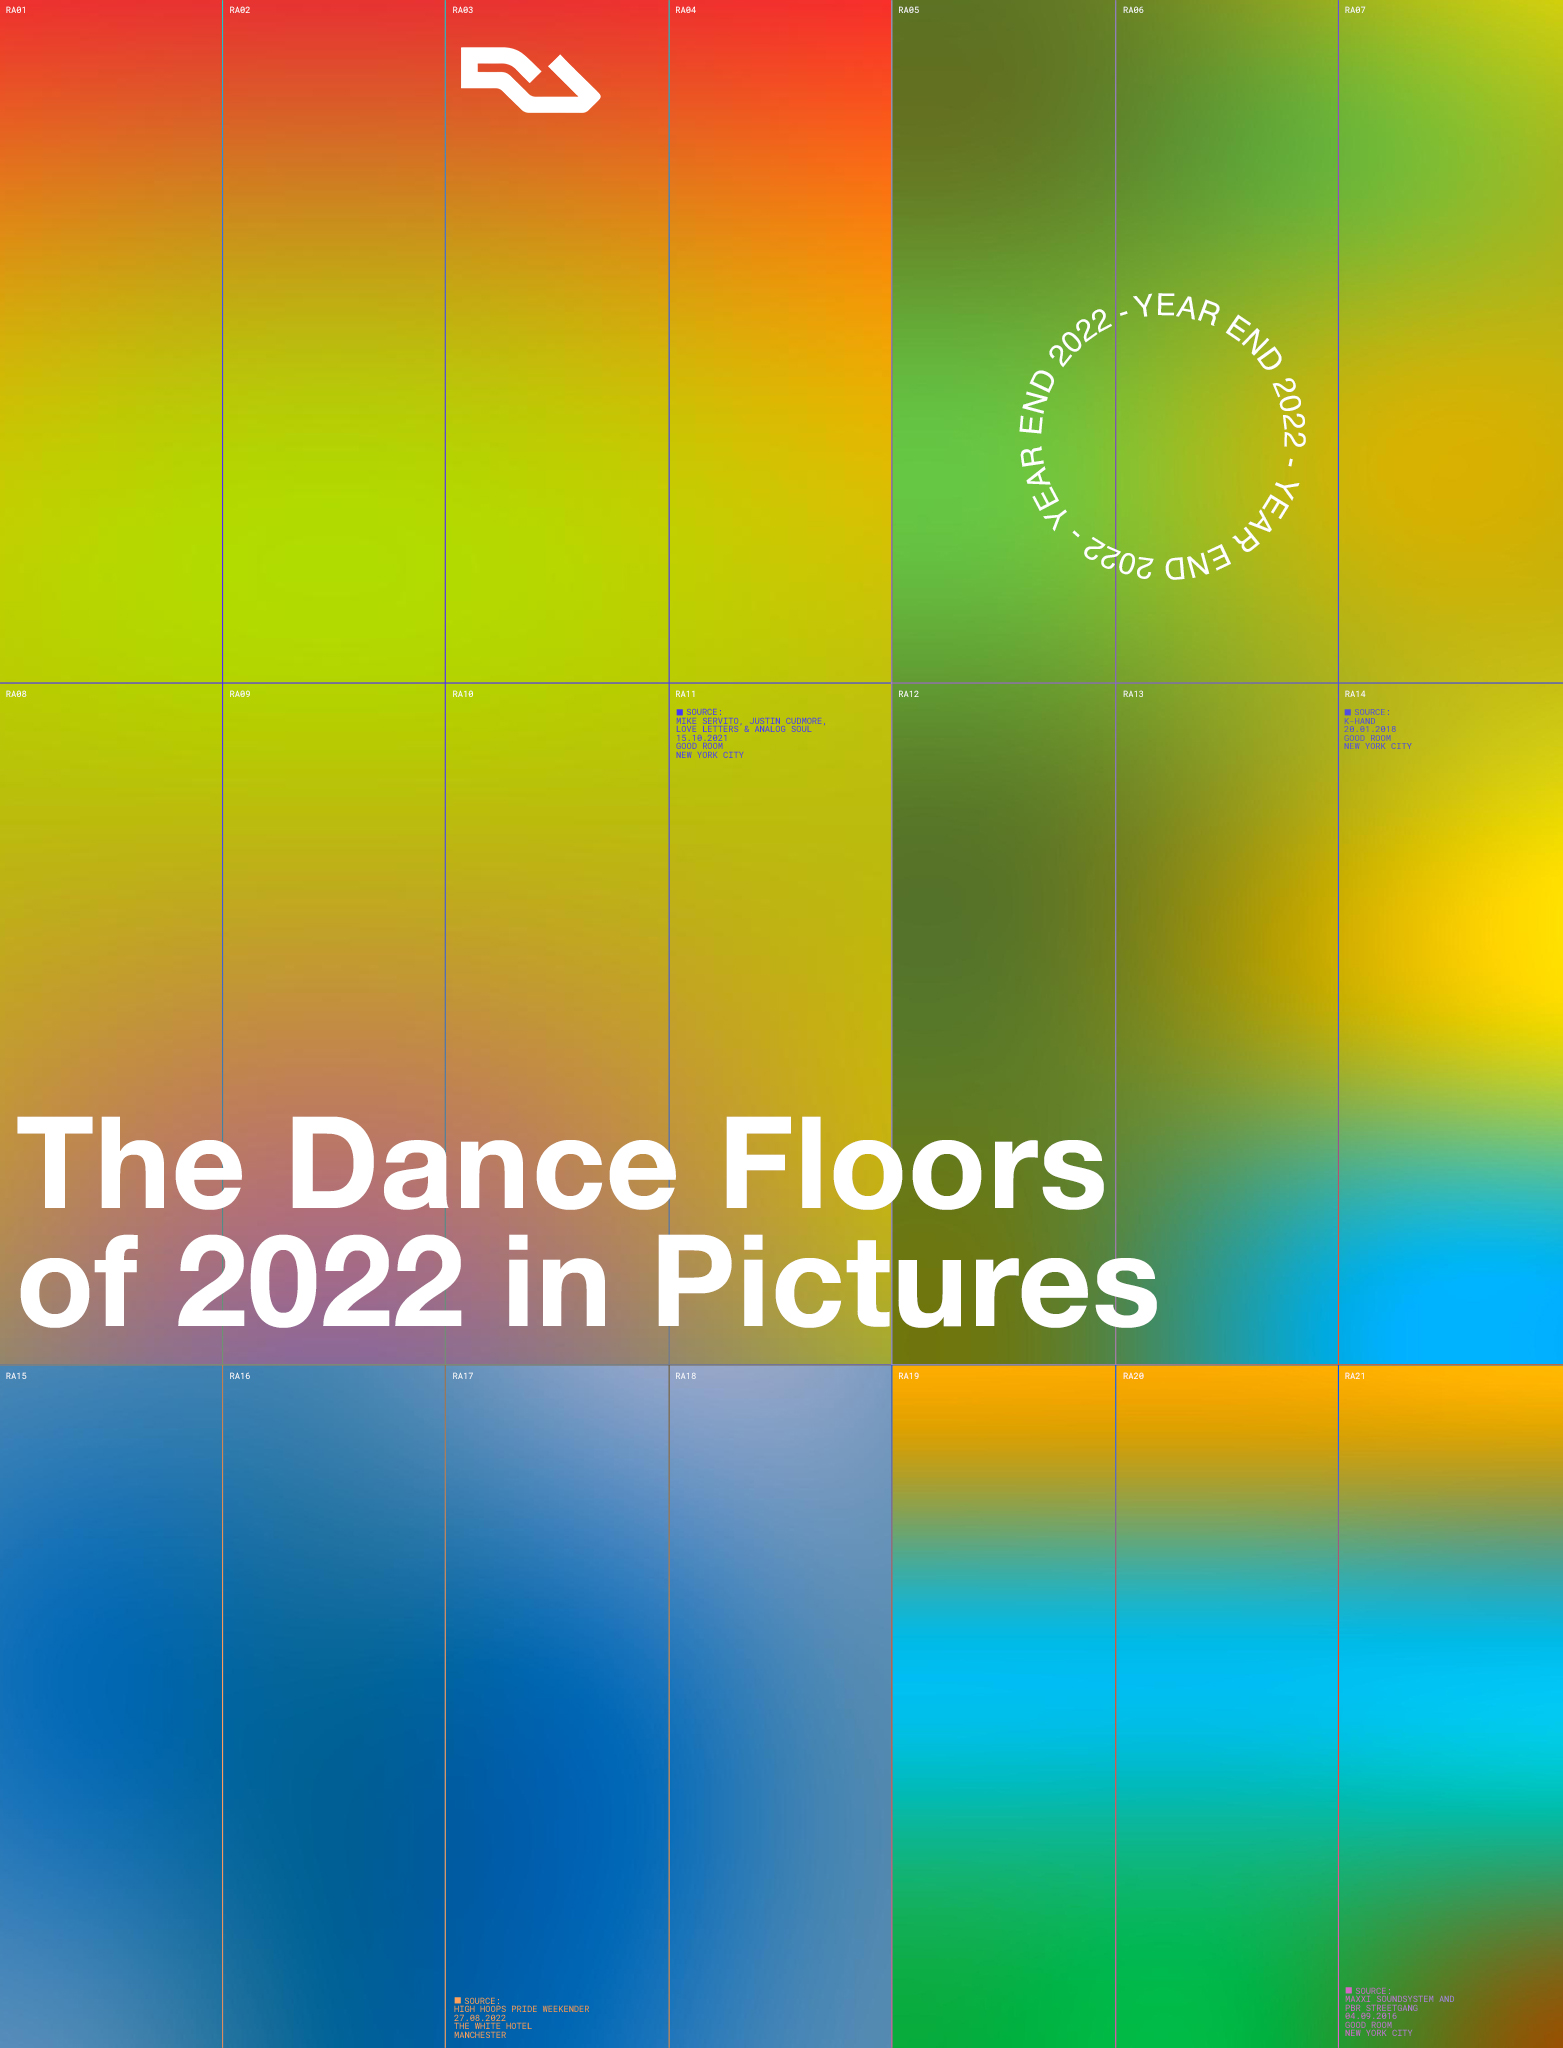 The Dance Floors of 2022 in Pictures